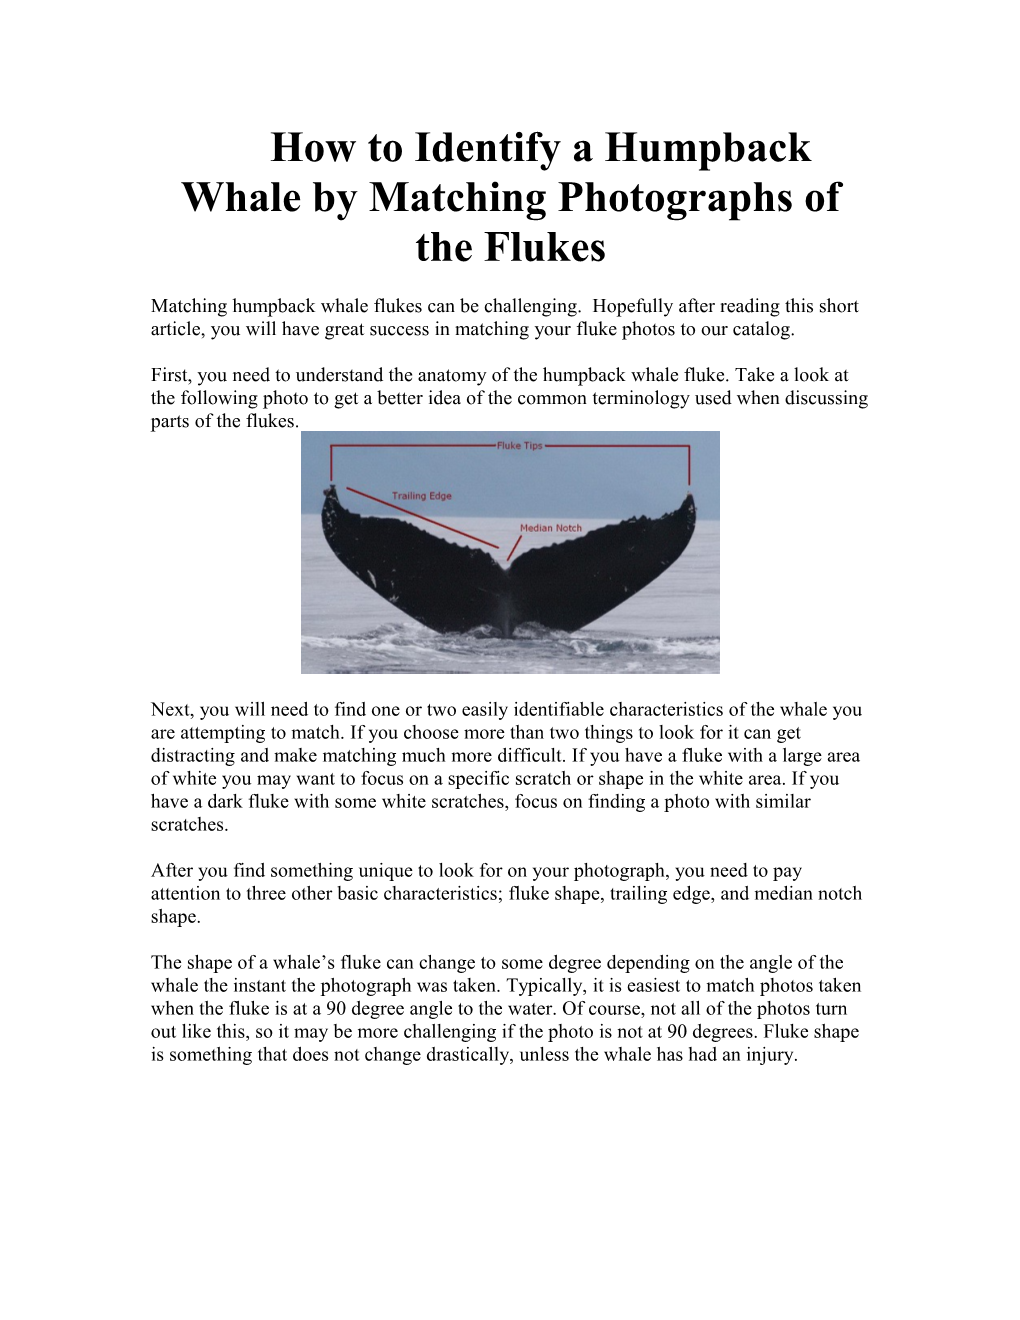 How to Identify a Humpback Whale by Matching Photographs of the Flukes